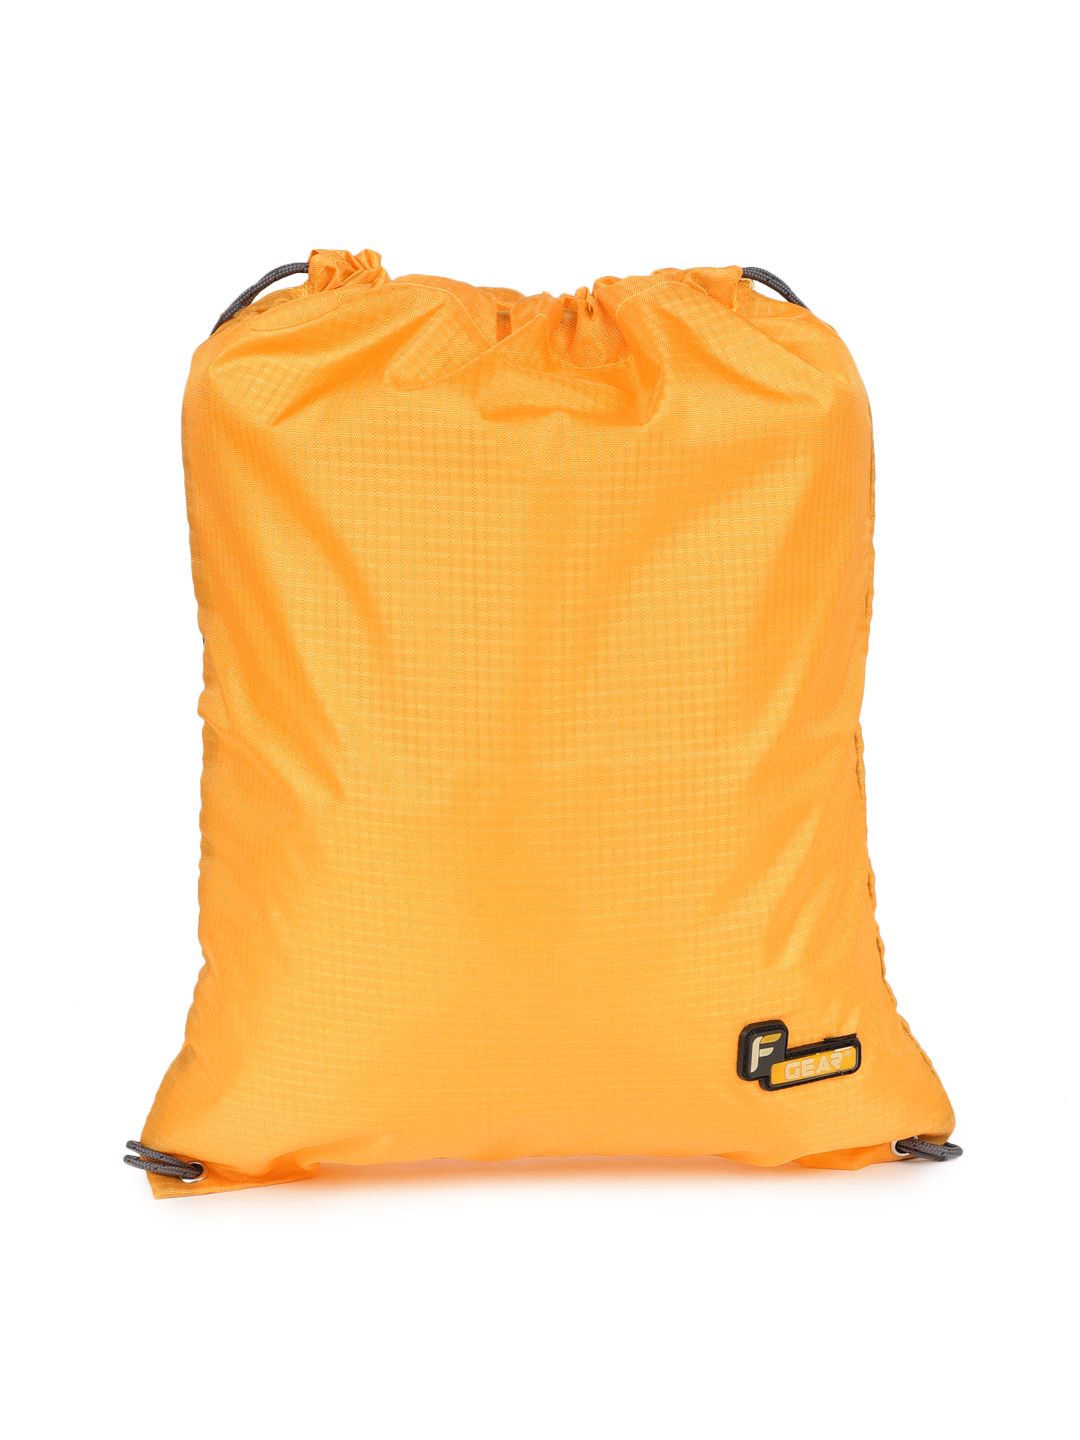 F Gear Unisex Yellow String Backpack Price in India